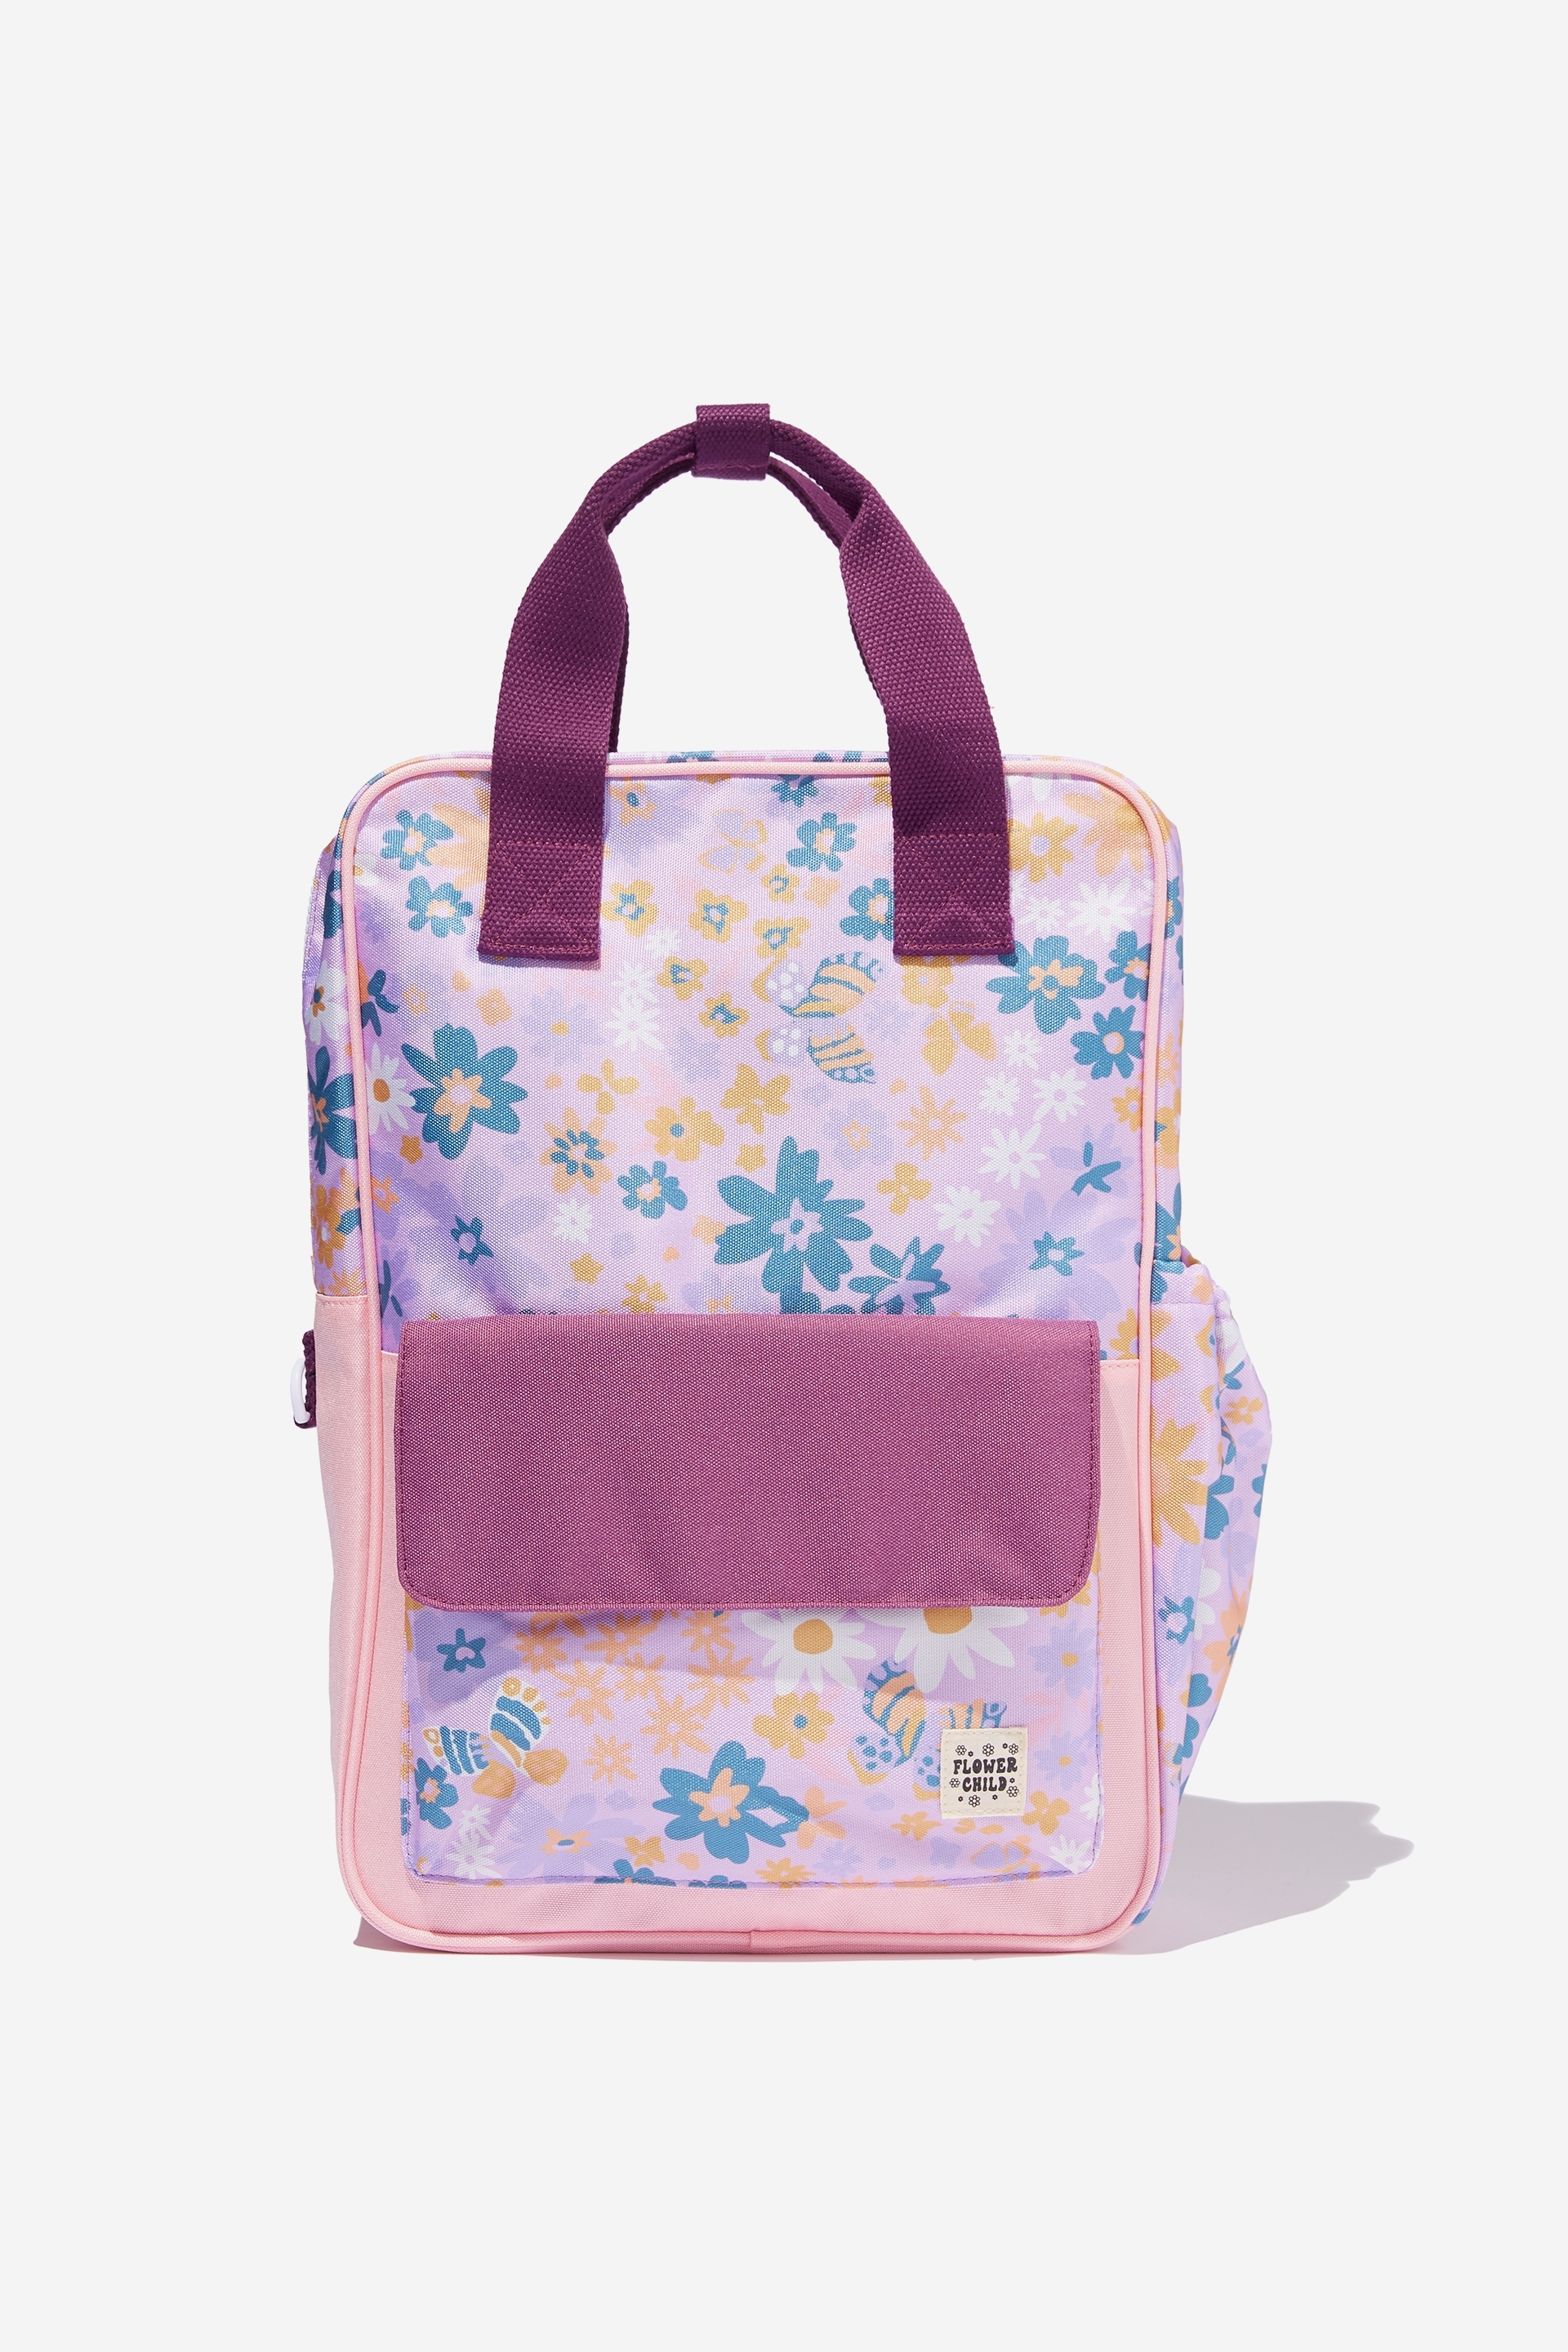 Cotton On Kids - Back To It Backpack - Very berry/paradise floral